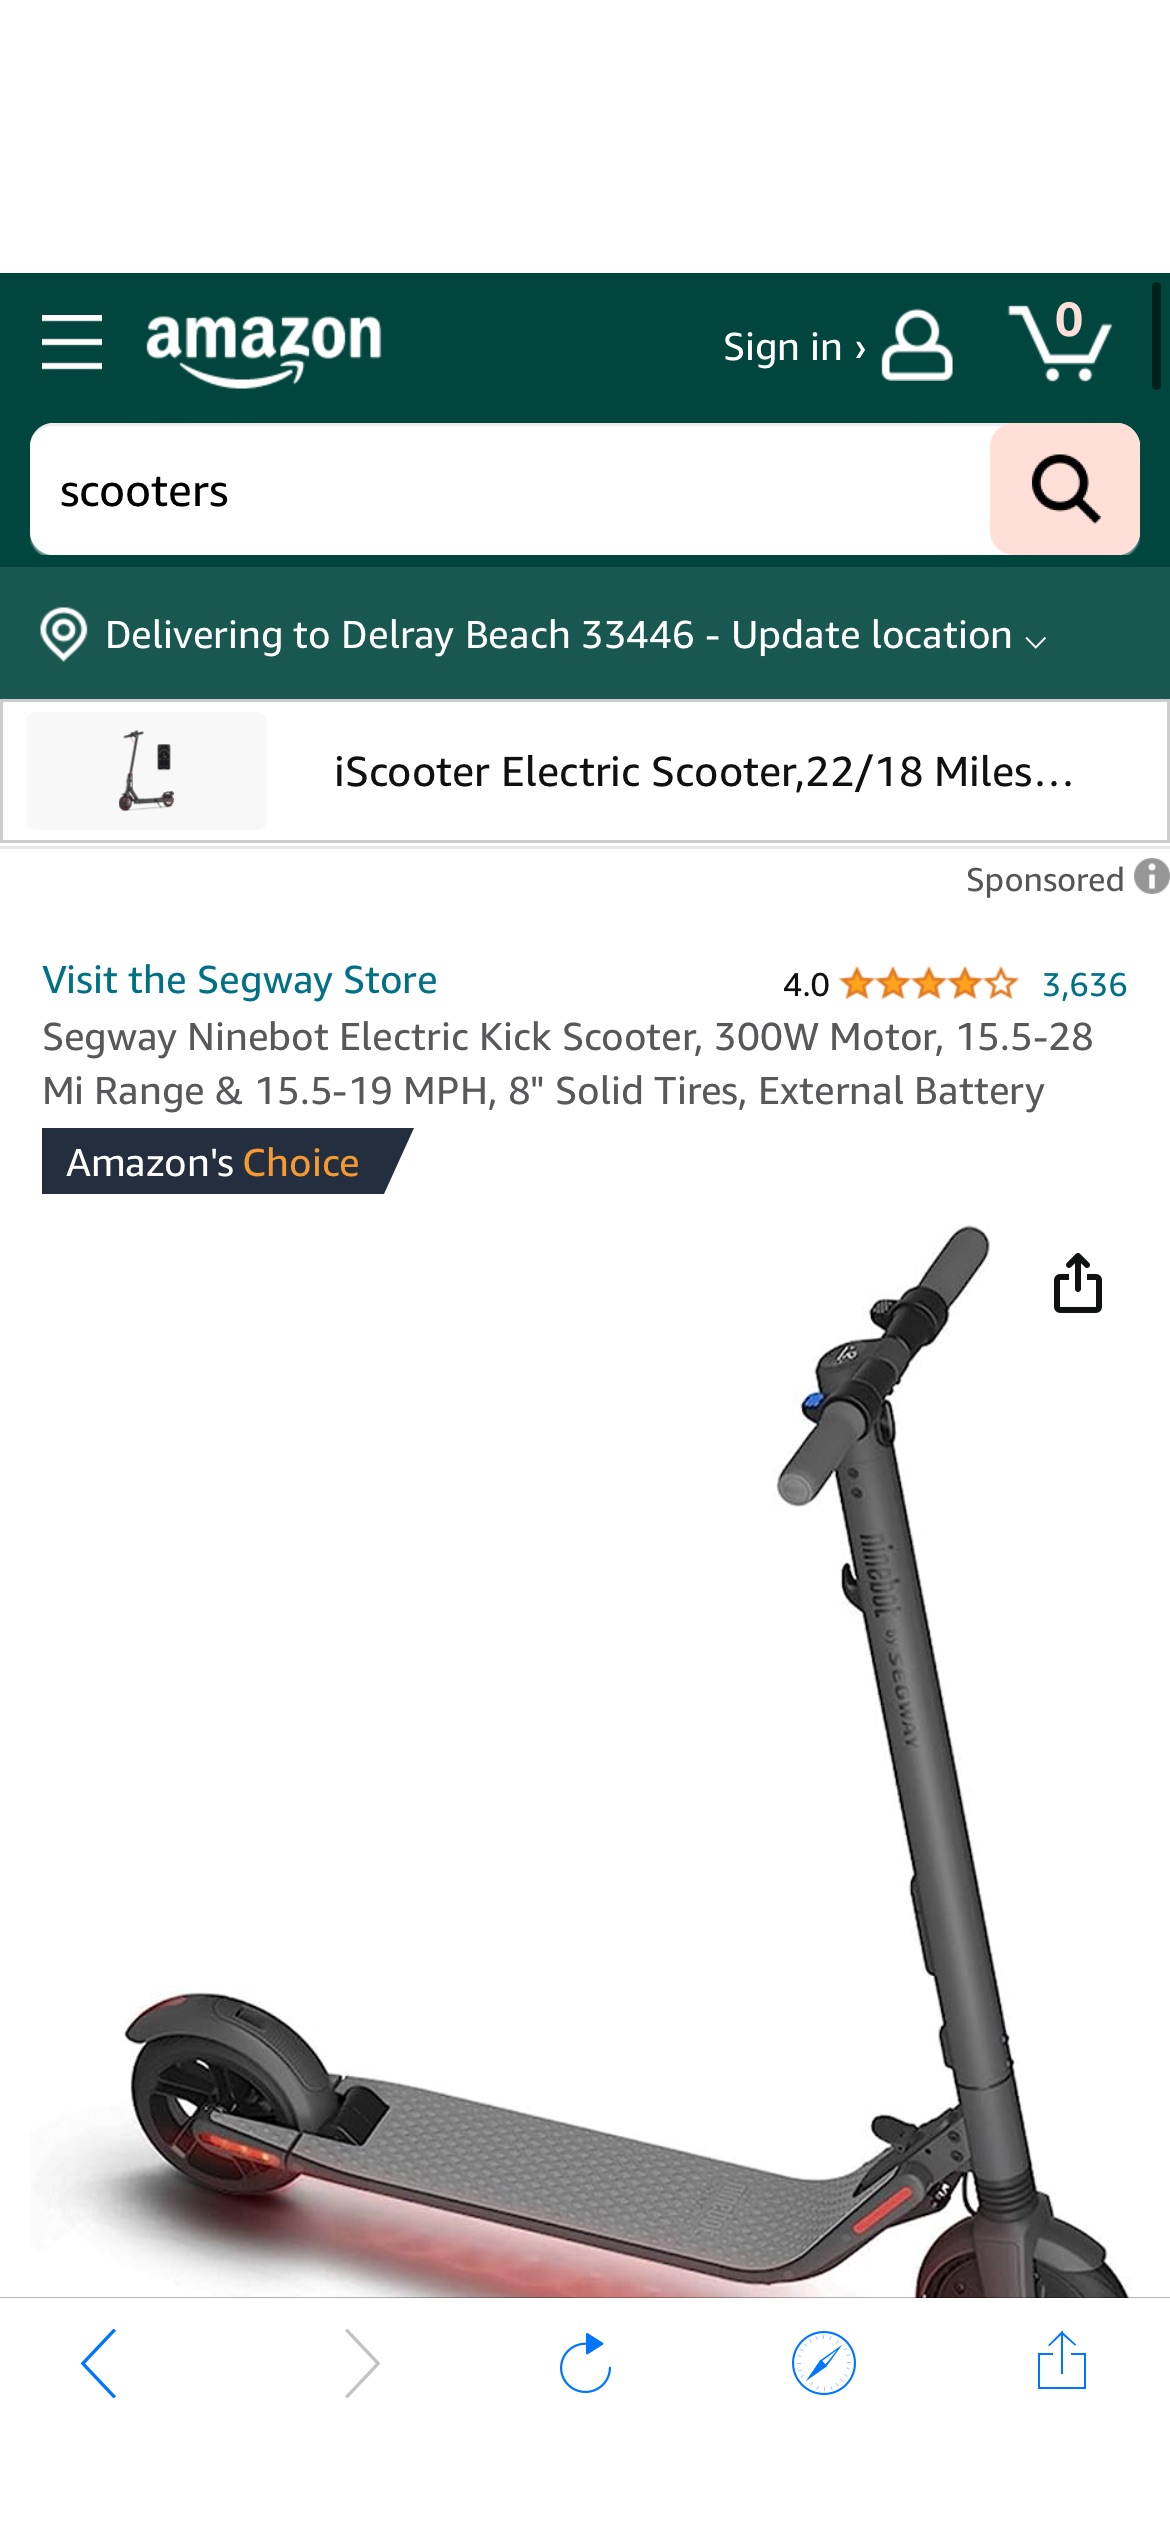 Amazon.com : Segway Ninebot ES2 Electric Kick Scooter, Lightweight and Foldable, Upgraded Motor Power, Dark Grey Large : Sports & Outdoors滑板车